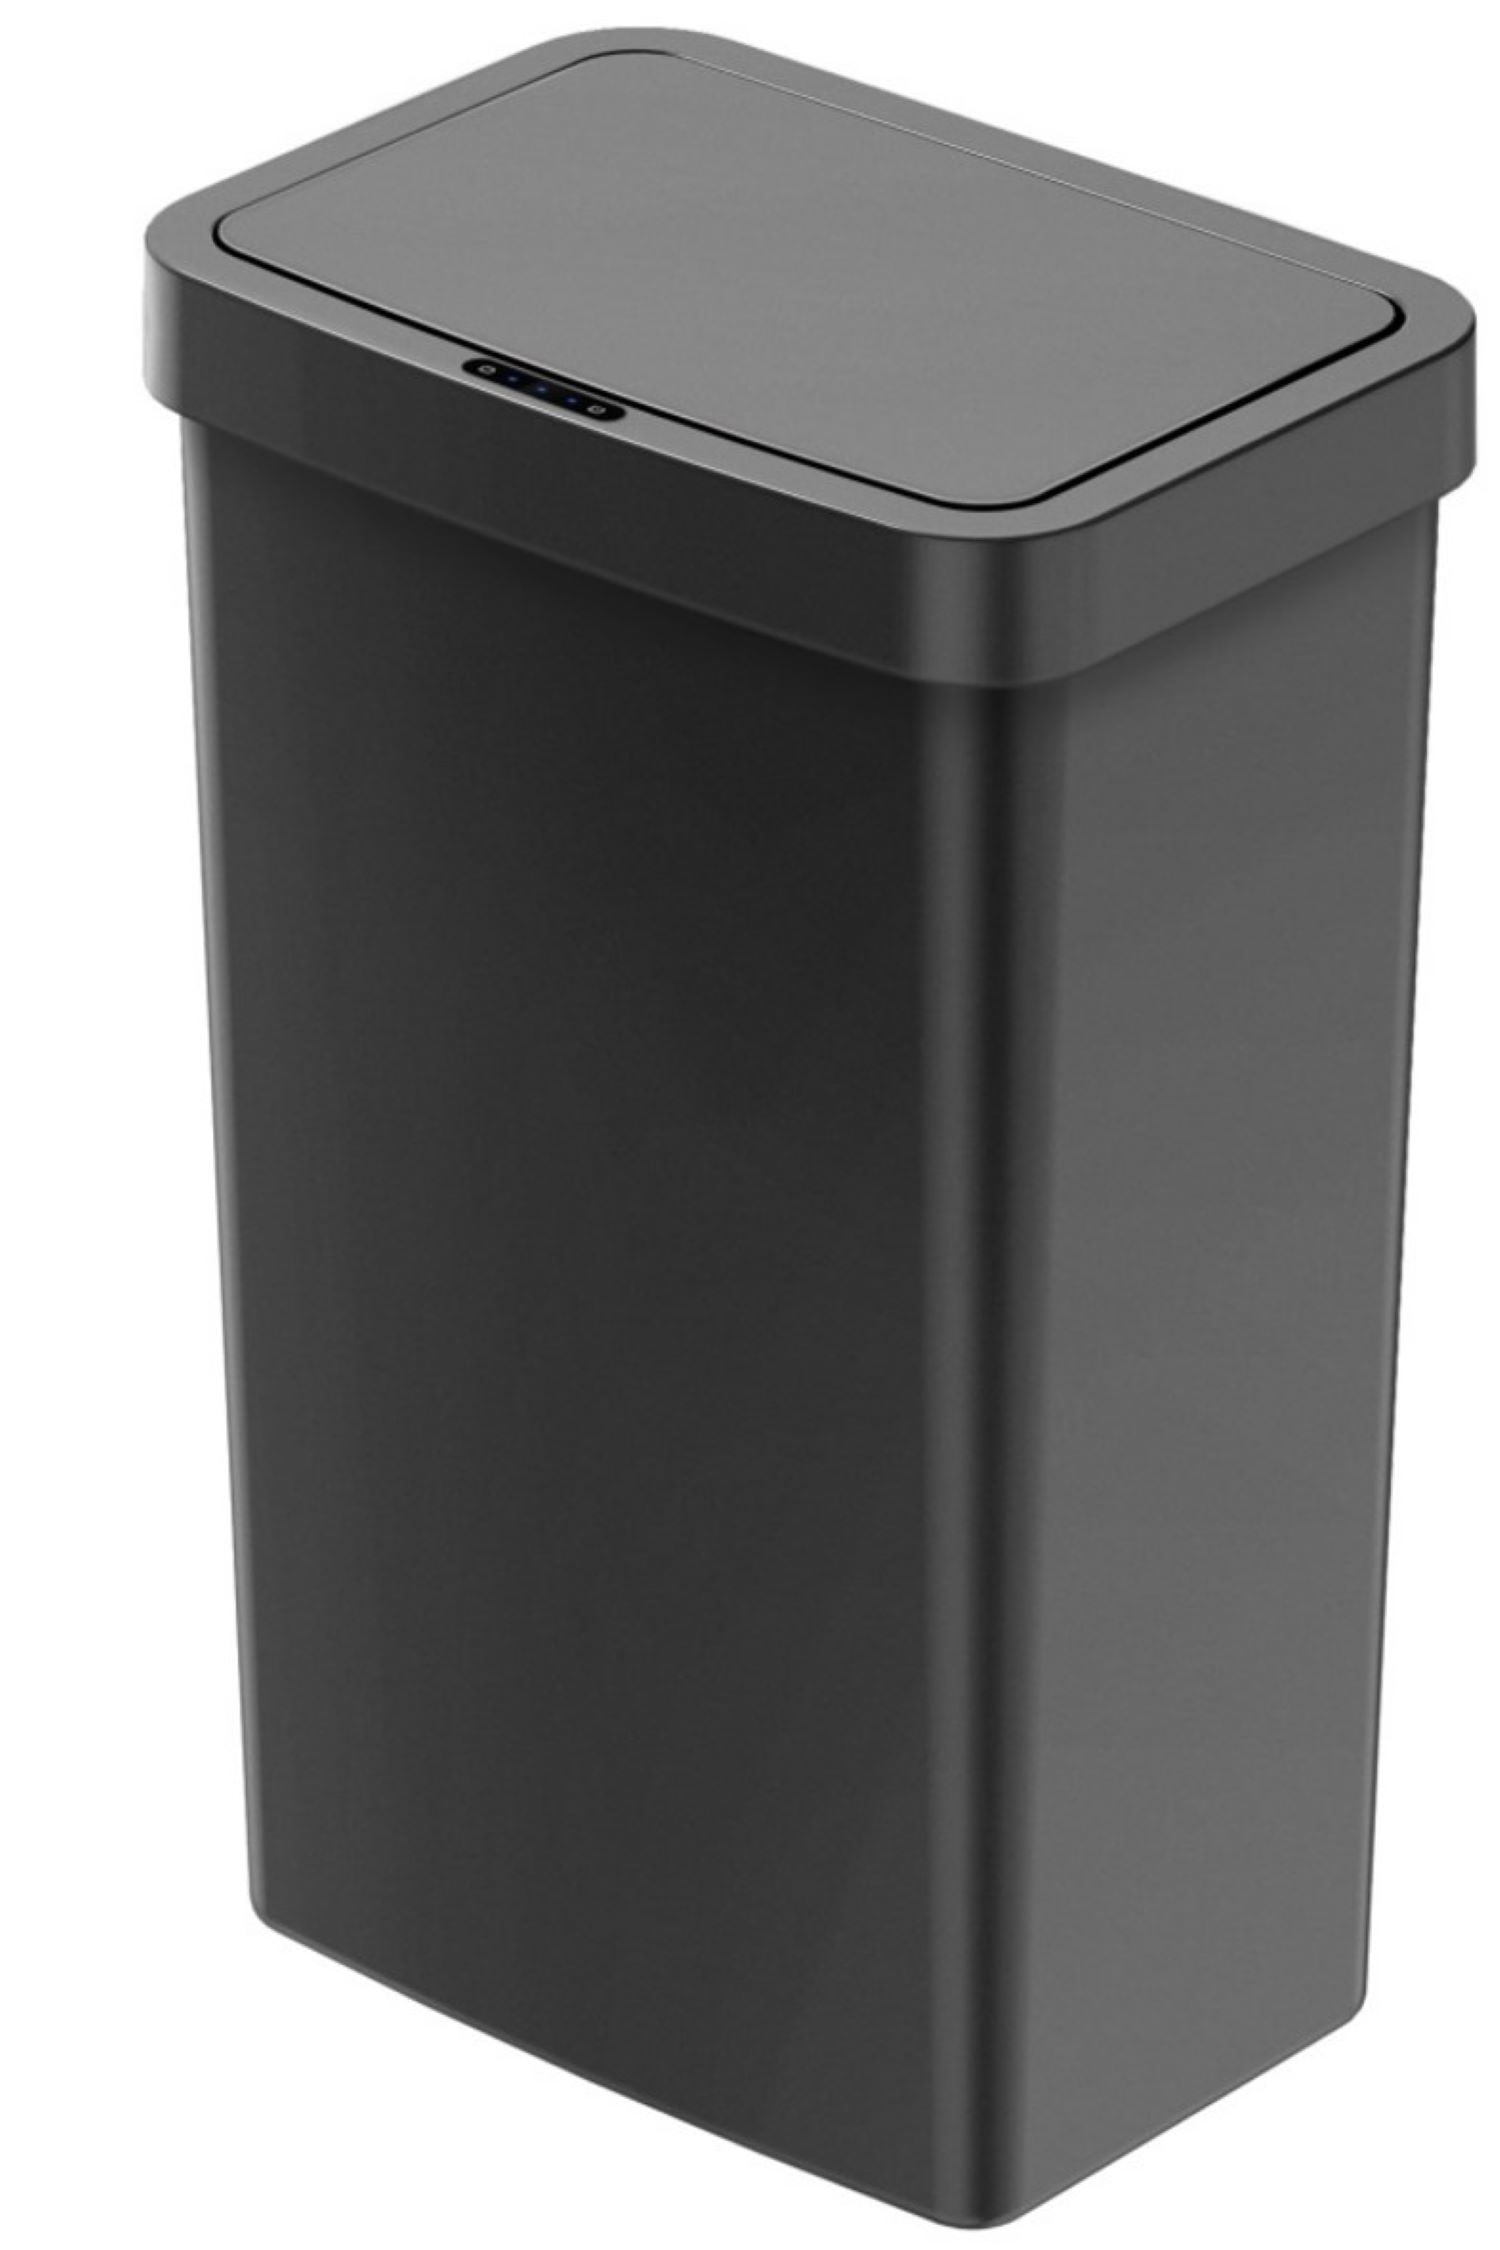 Mainstays 13.2 Gallon Trash Can, Motion Sensor Kitchen Trash Can, Stainless  Steel